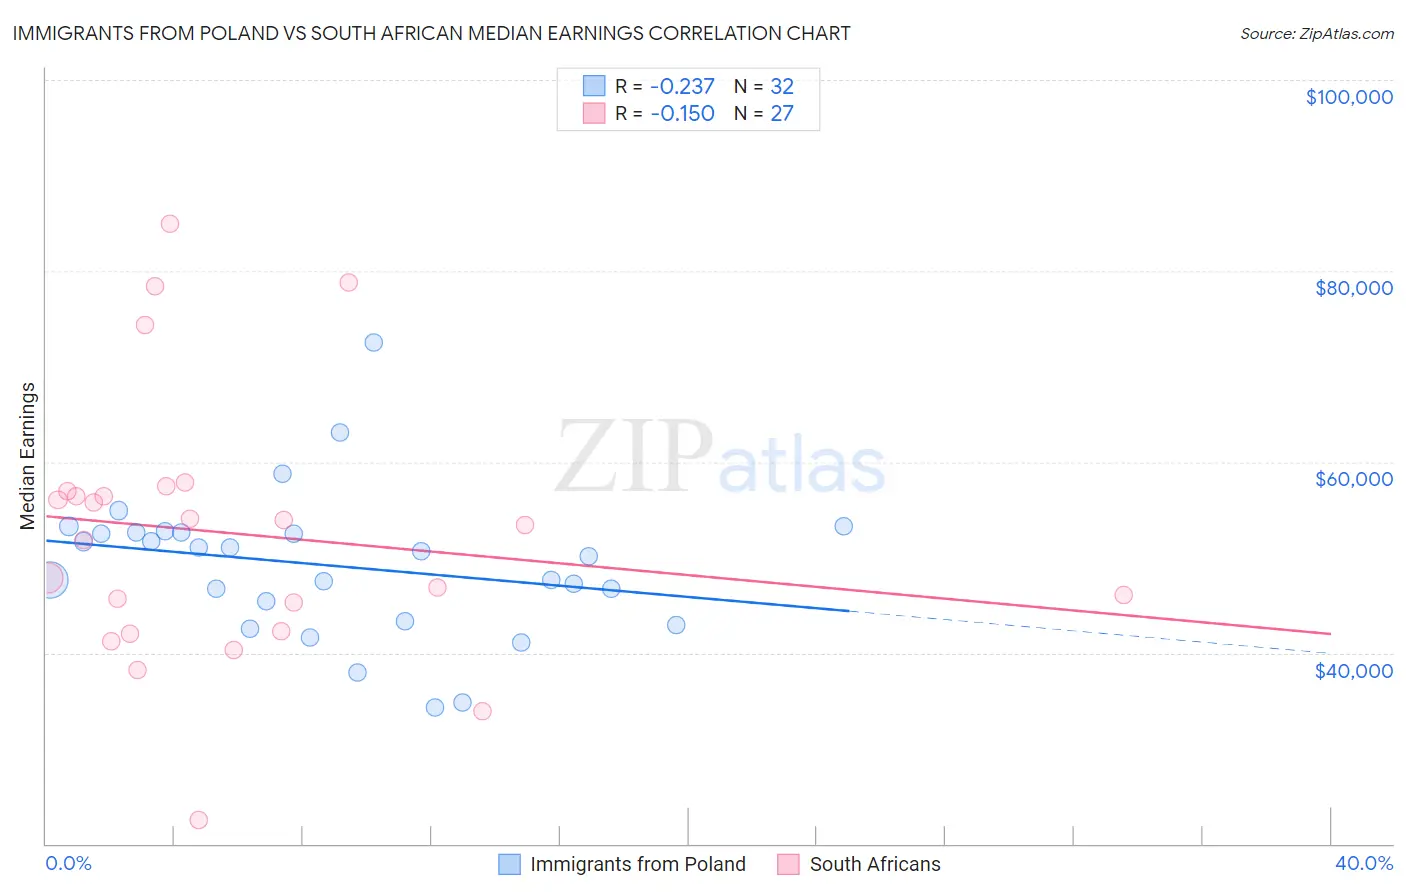 Immigrants from Poland vs South African Median Earnings